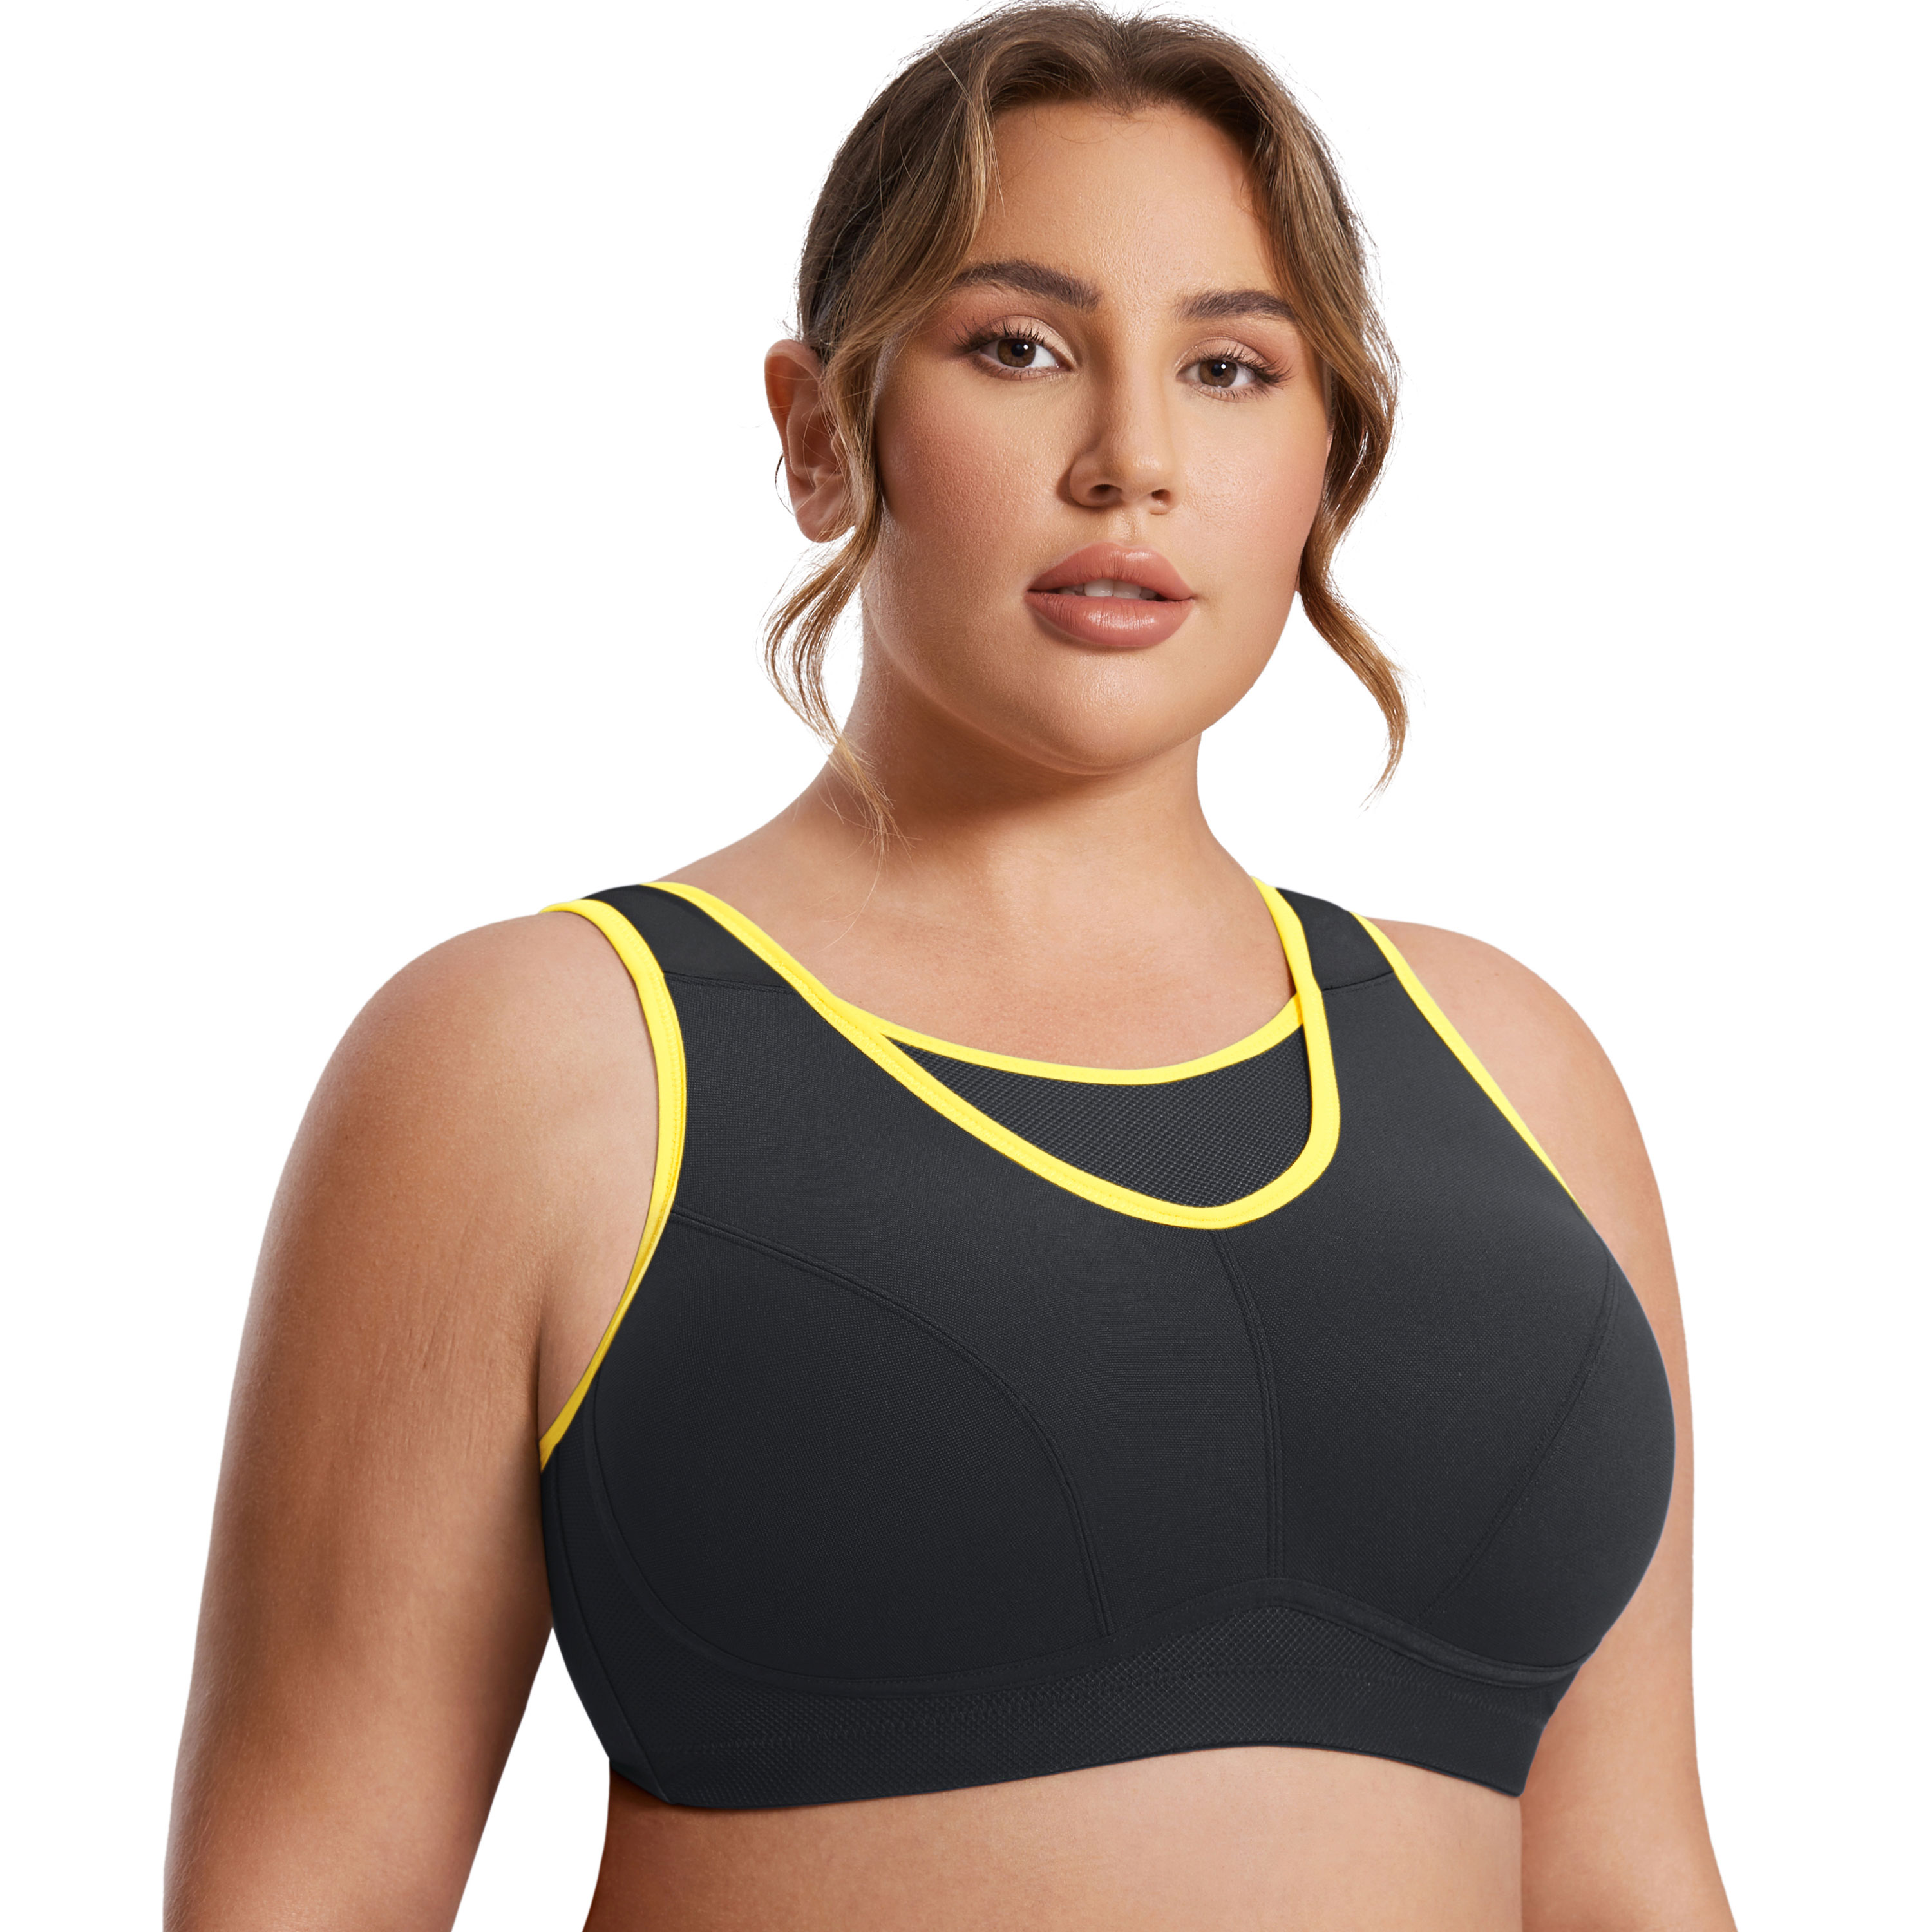 SYROKAN Women's Plus Size High Impact Sports Bra Full Cup Wirefree Workout  Bras